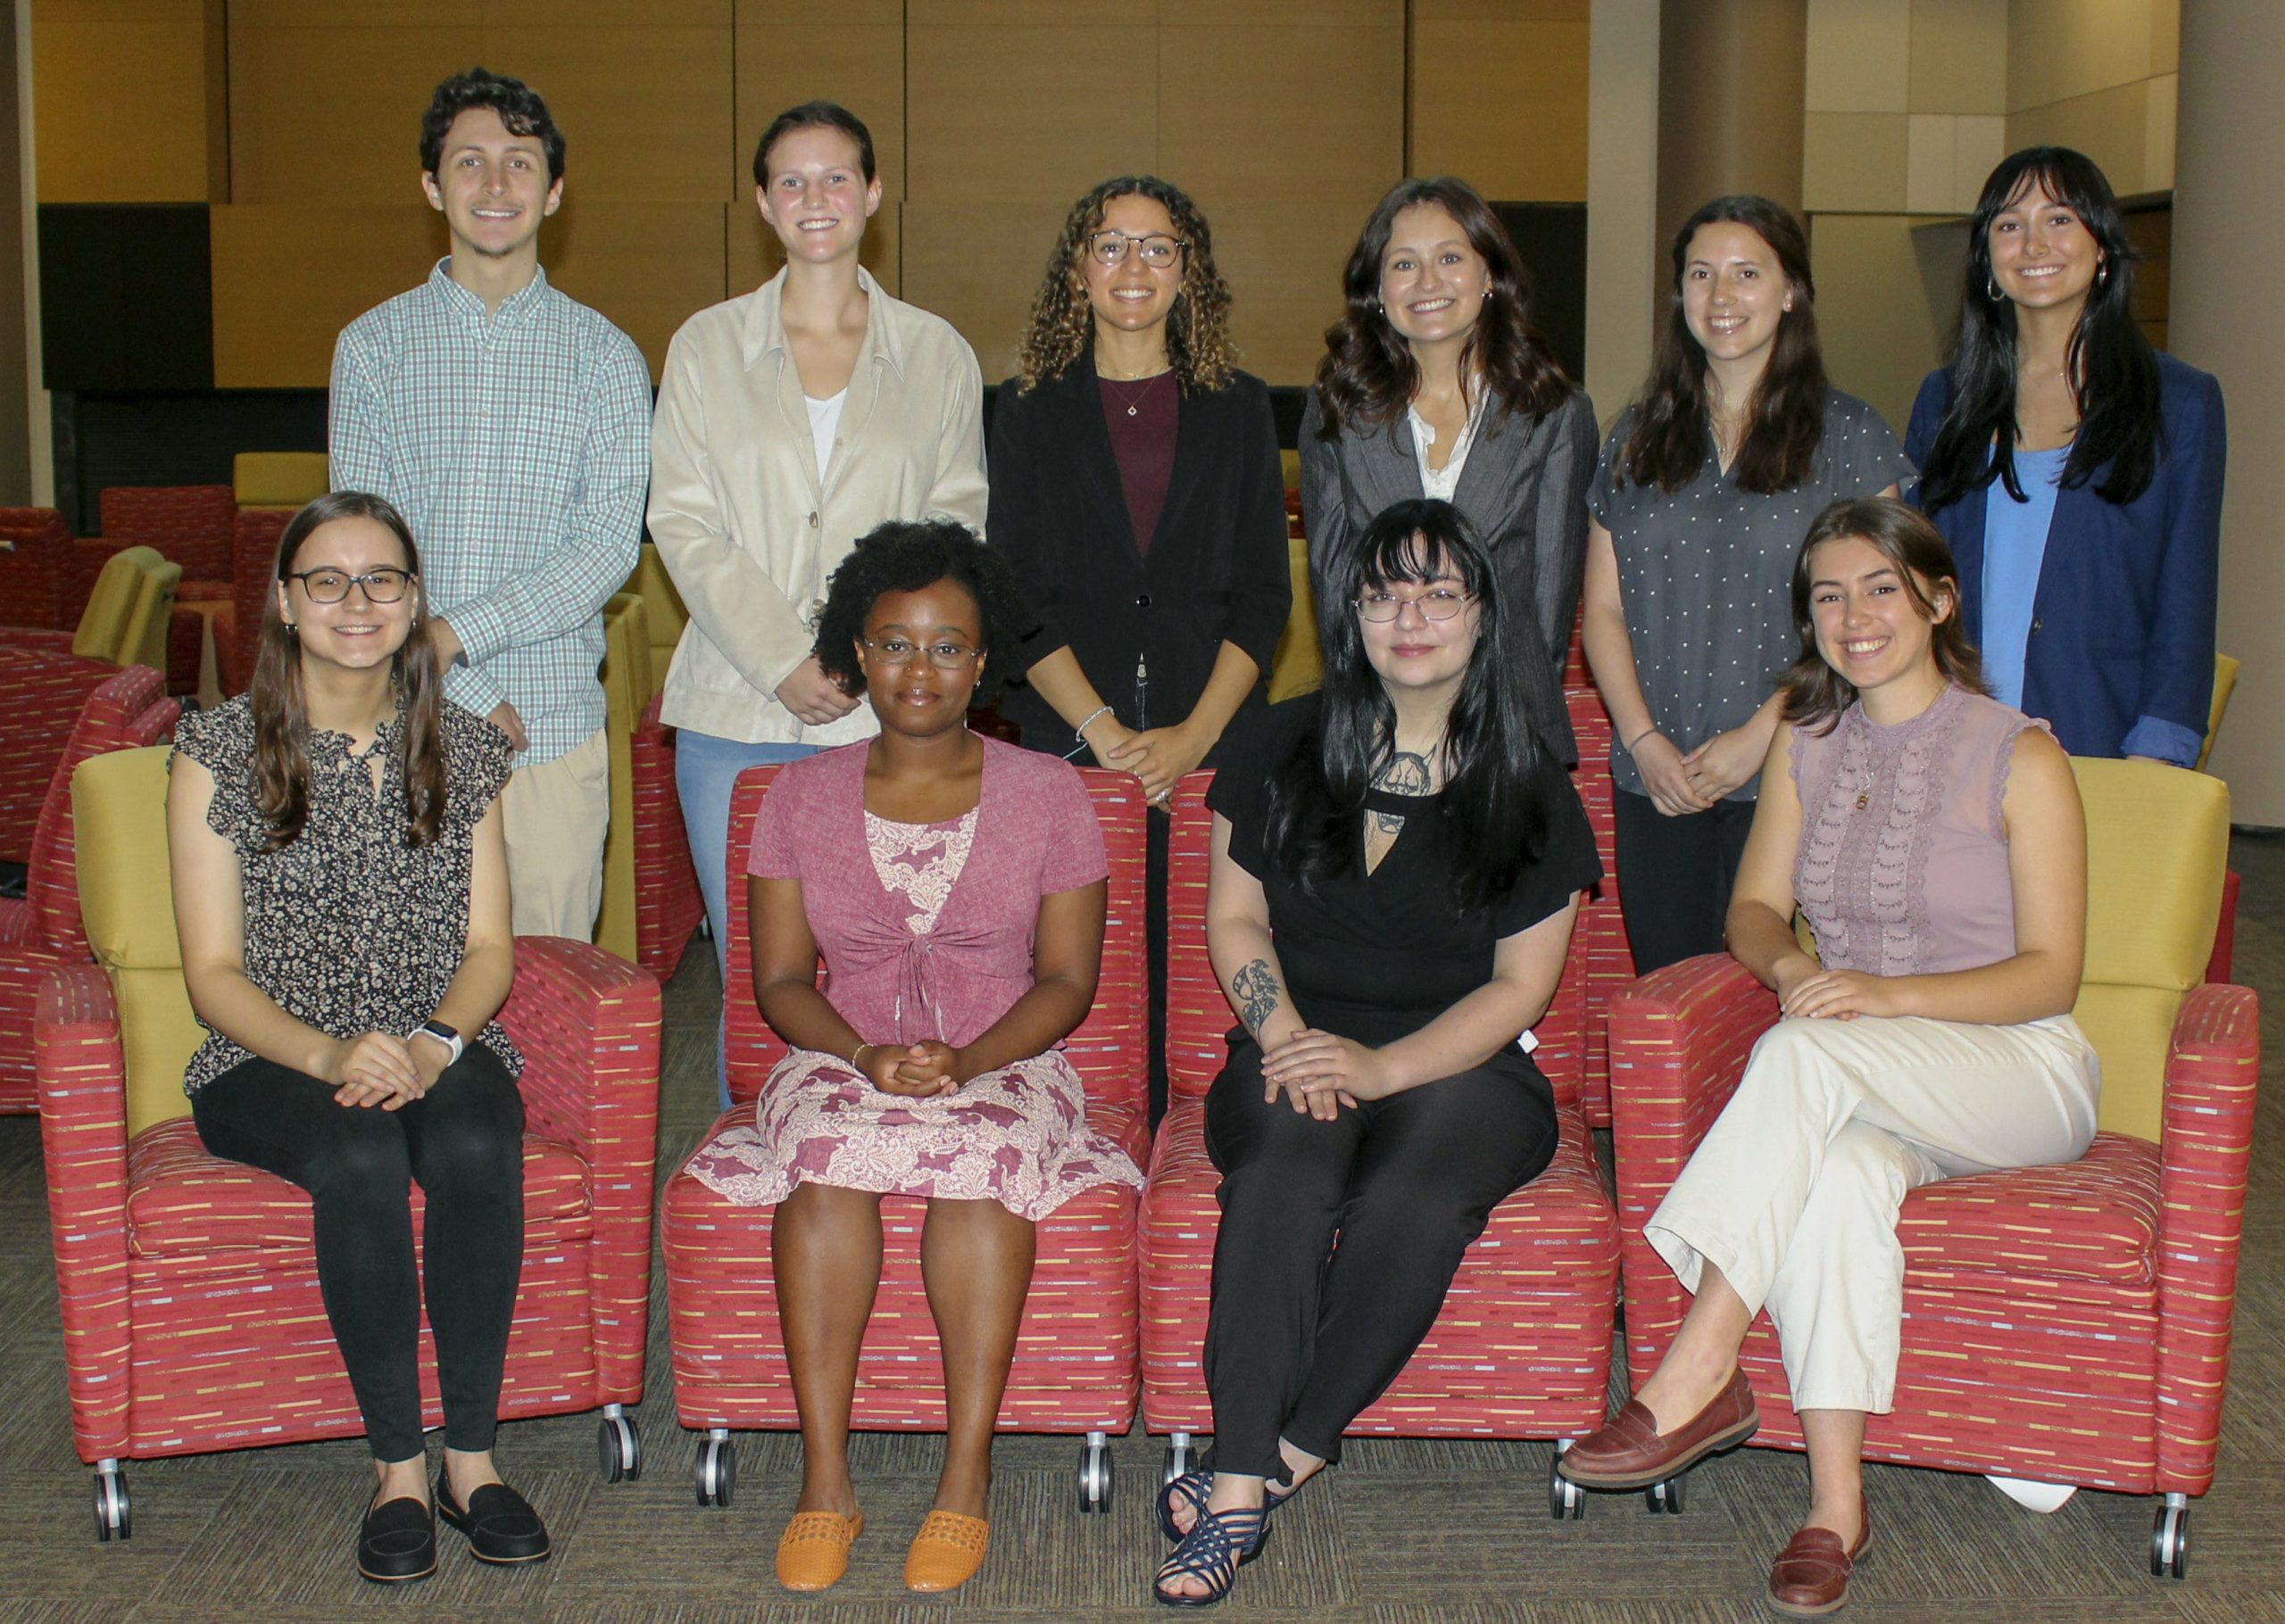 Ten exceptional undergraduate students from across the country spent the summer at the University of Arkansas at Little Rock investigating Muslim hate crimes and anti-Muslim sentiment in Arkansas.